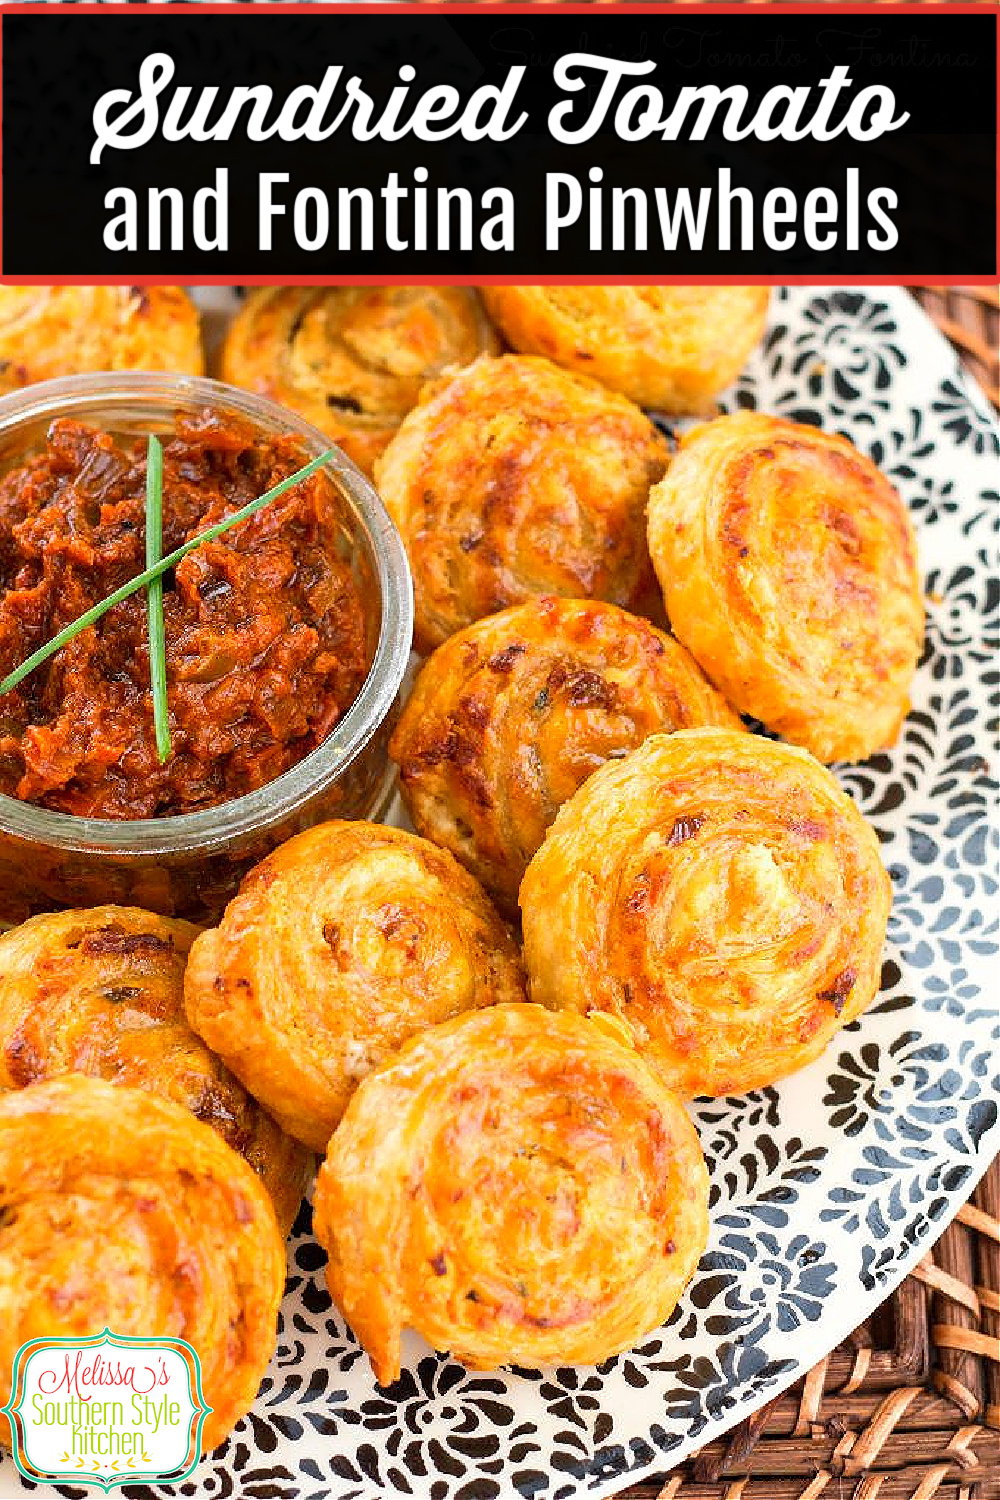 These Sundried Tomato Fontina Puff Pinwheels are an amazing and oh-so-simple appetizer to make #puffpastry #pinwheels #sundriedtomatoes #sundriedtomatopinwheels #puffpastryrecipes #easyappetizers #sundriedtomatoes #pastry via @melissasssk